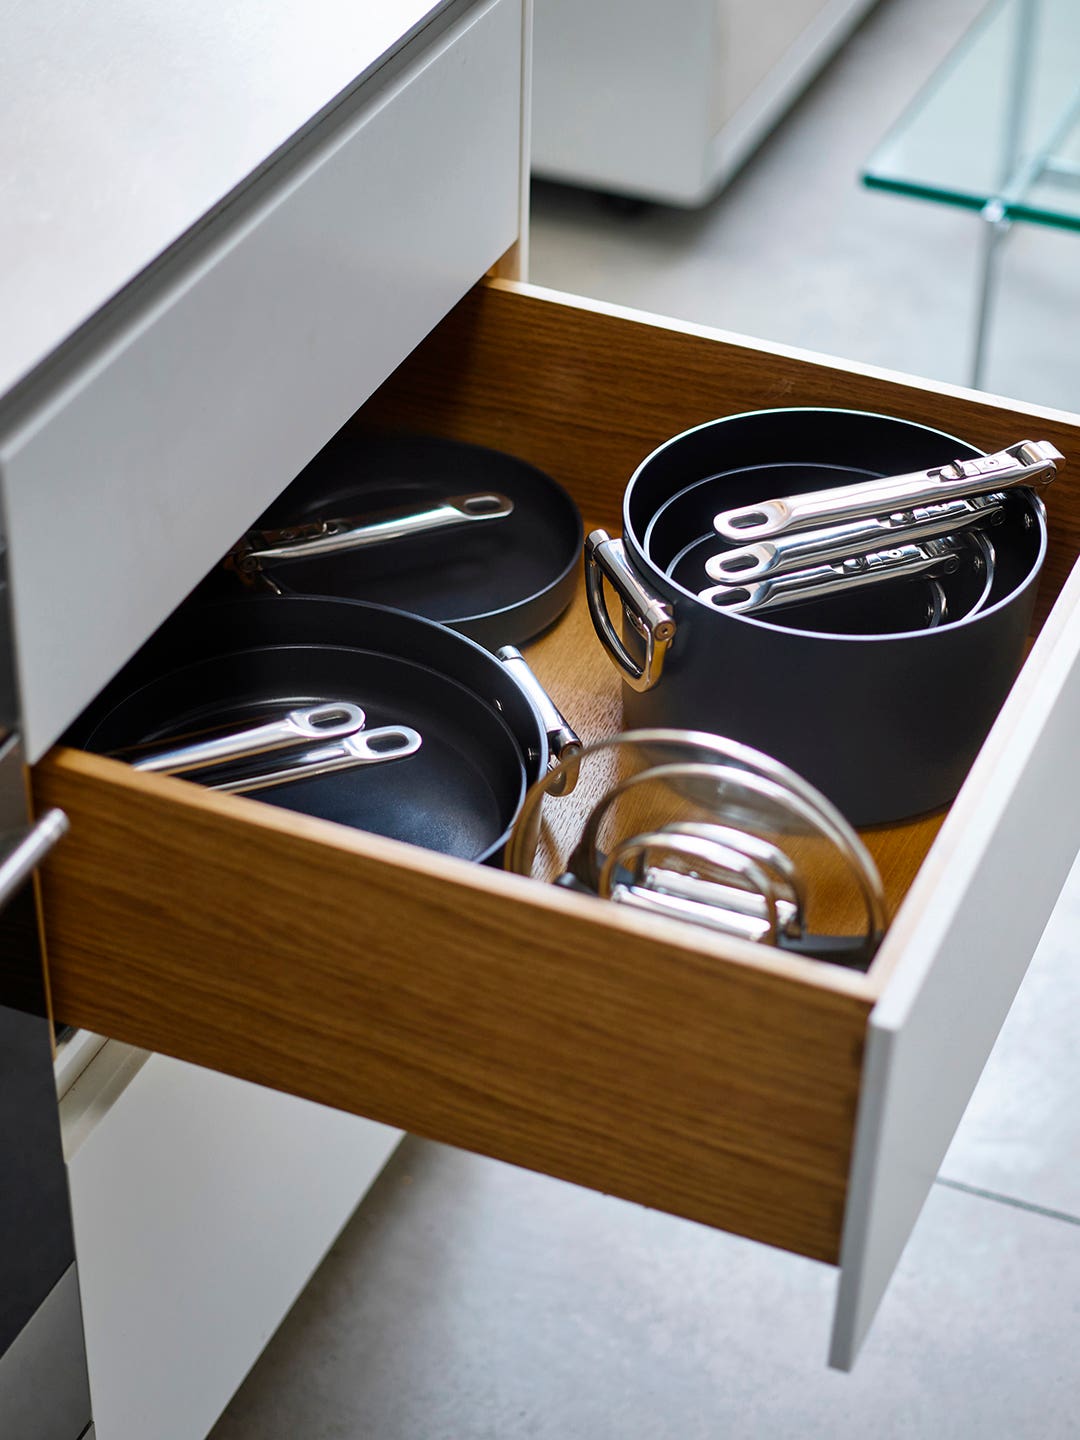 In My Tiny, Drawer-Less Kitchen, These Collapsible Pots Are My New BFFs